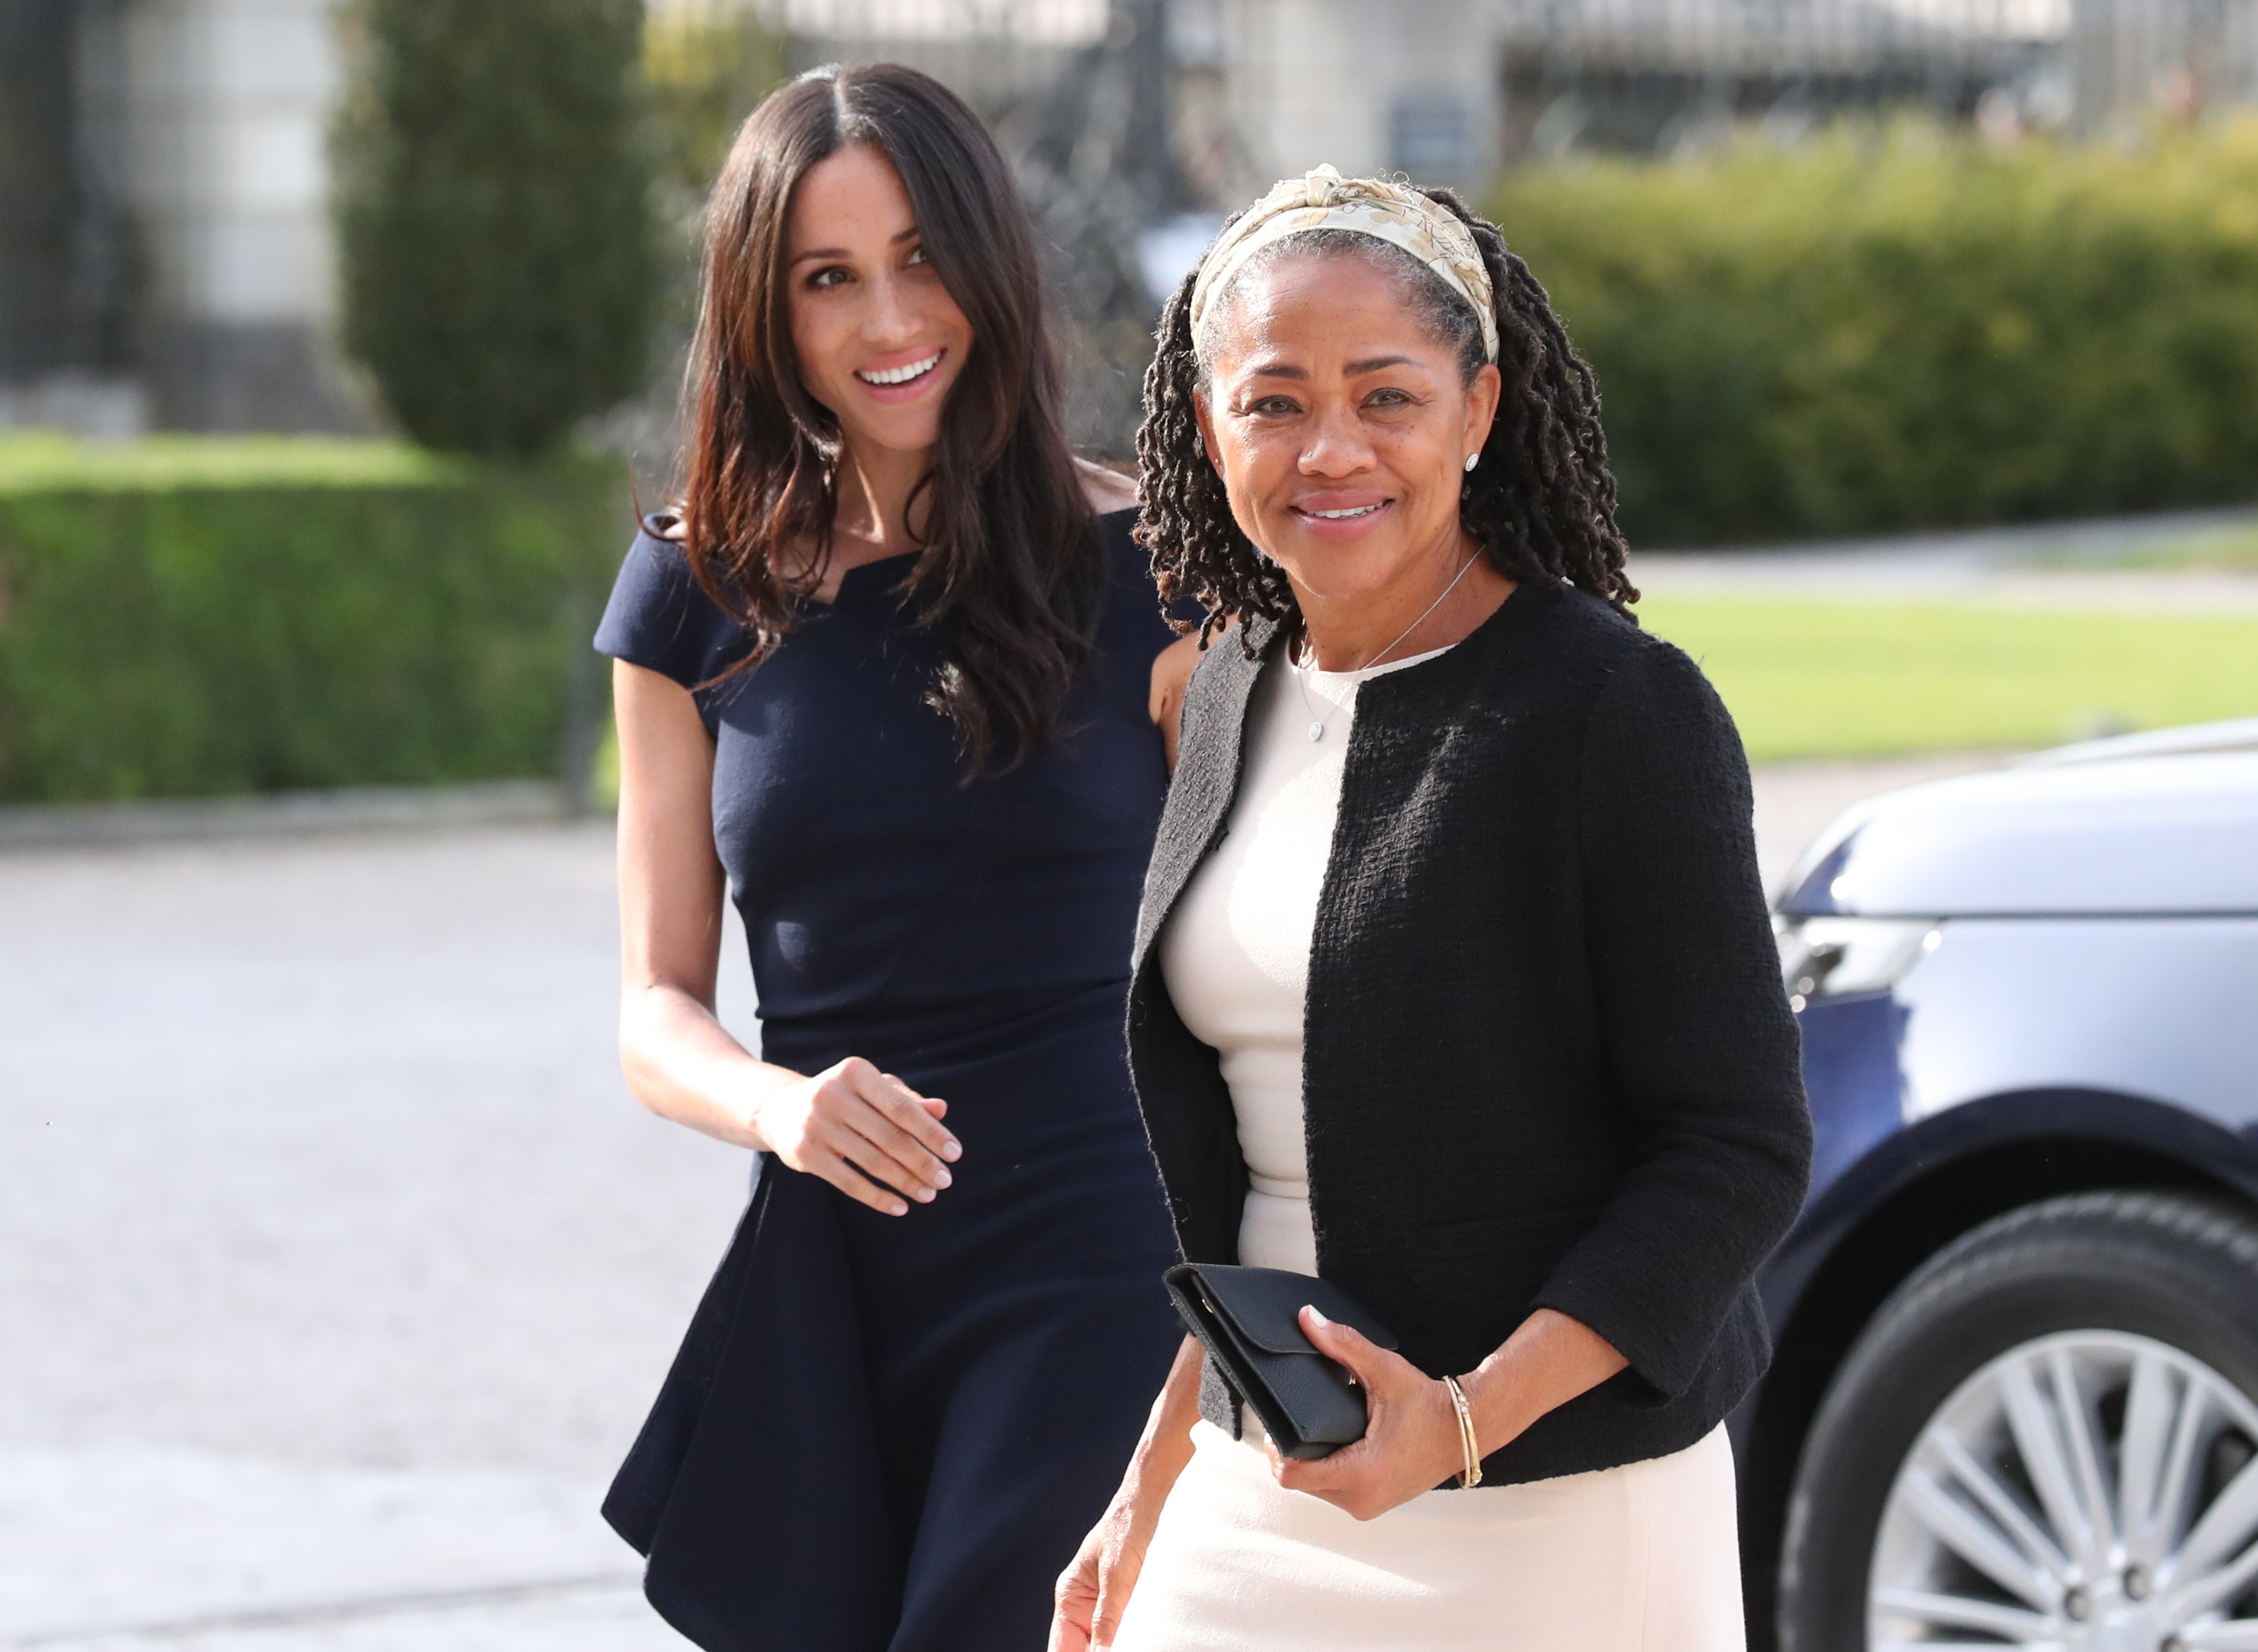 Meghan Markle hosts first royal event with her mom by her side